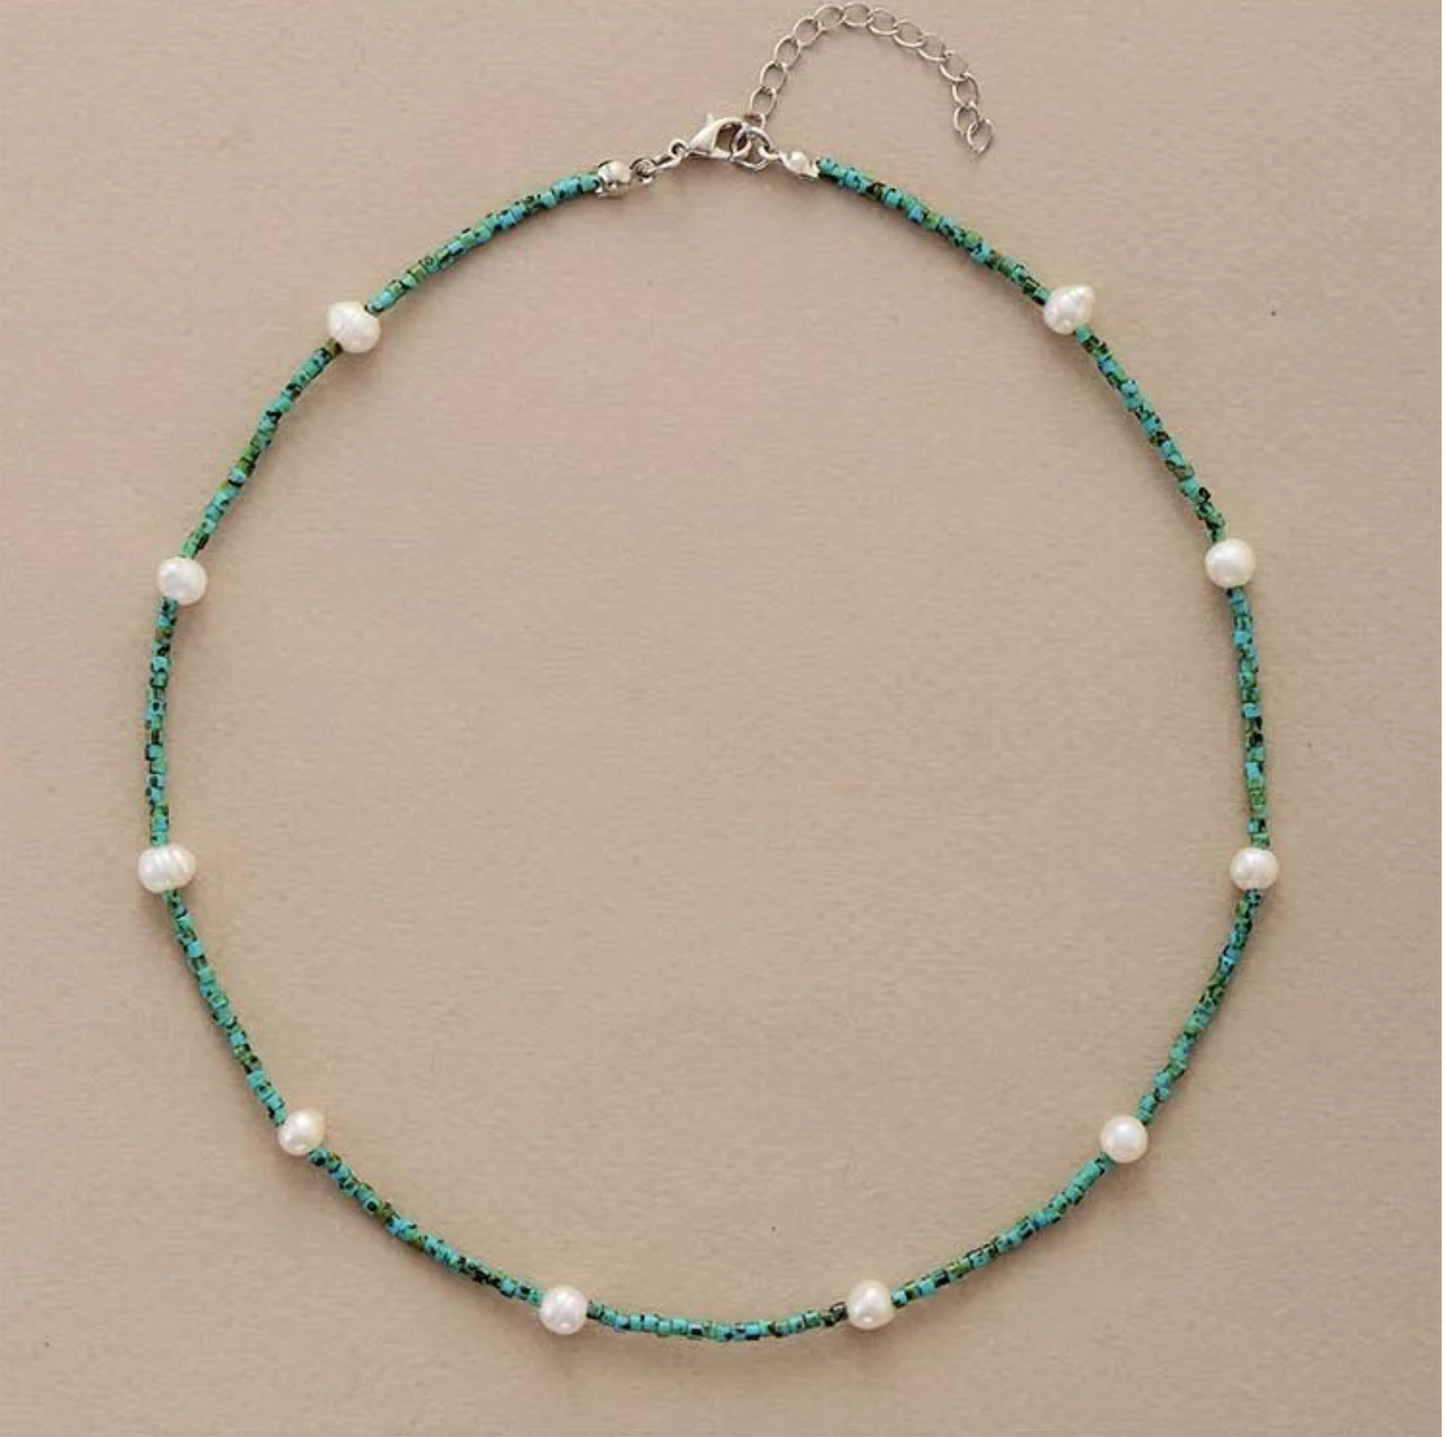 Aqua & Green Seed Bead and Freshwater Pearl Choker Necklace